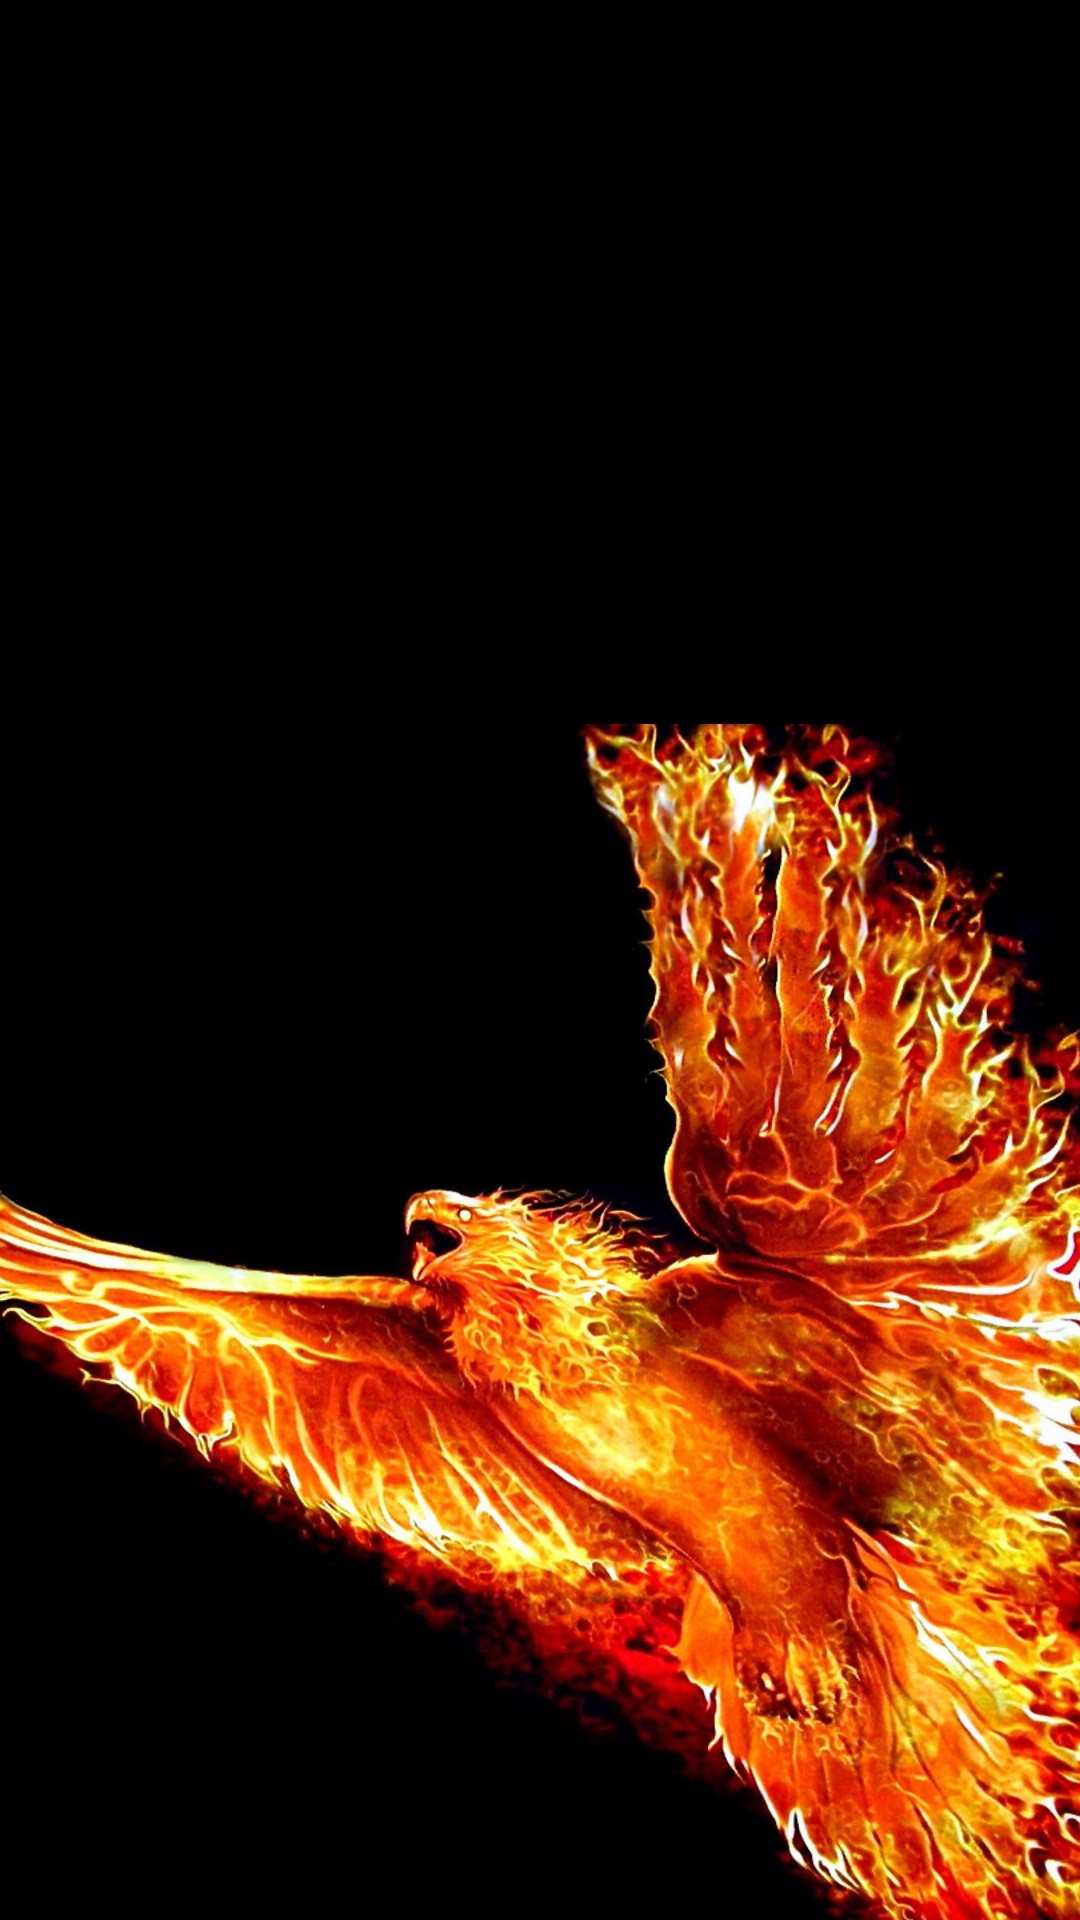 iPhone Wallpaper Phoenix Bird with image resolution 1080x1920 pixel. You can make this wallpaper for your iPhone 5, 6, 7, 8, X backgrounds, Mobile Screensaver, or iPad Lock Screen